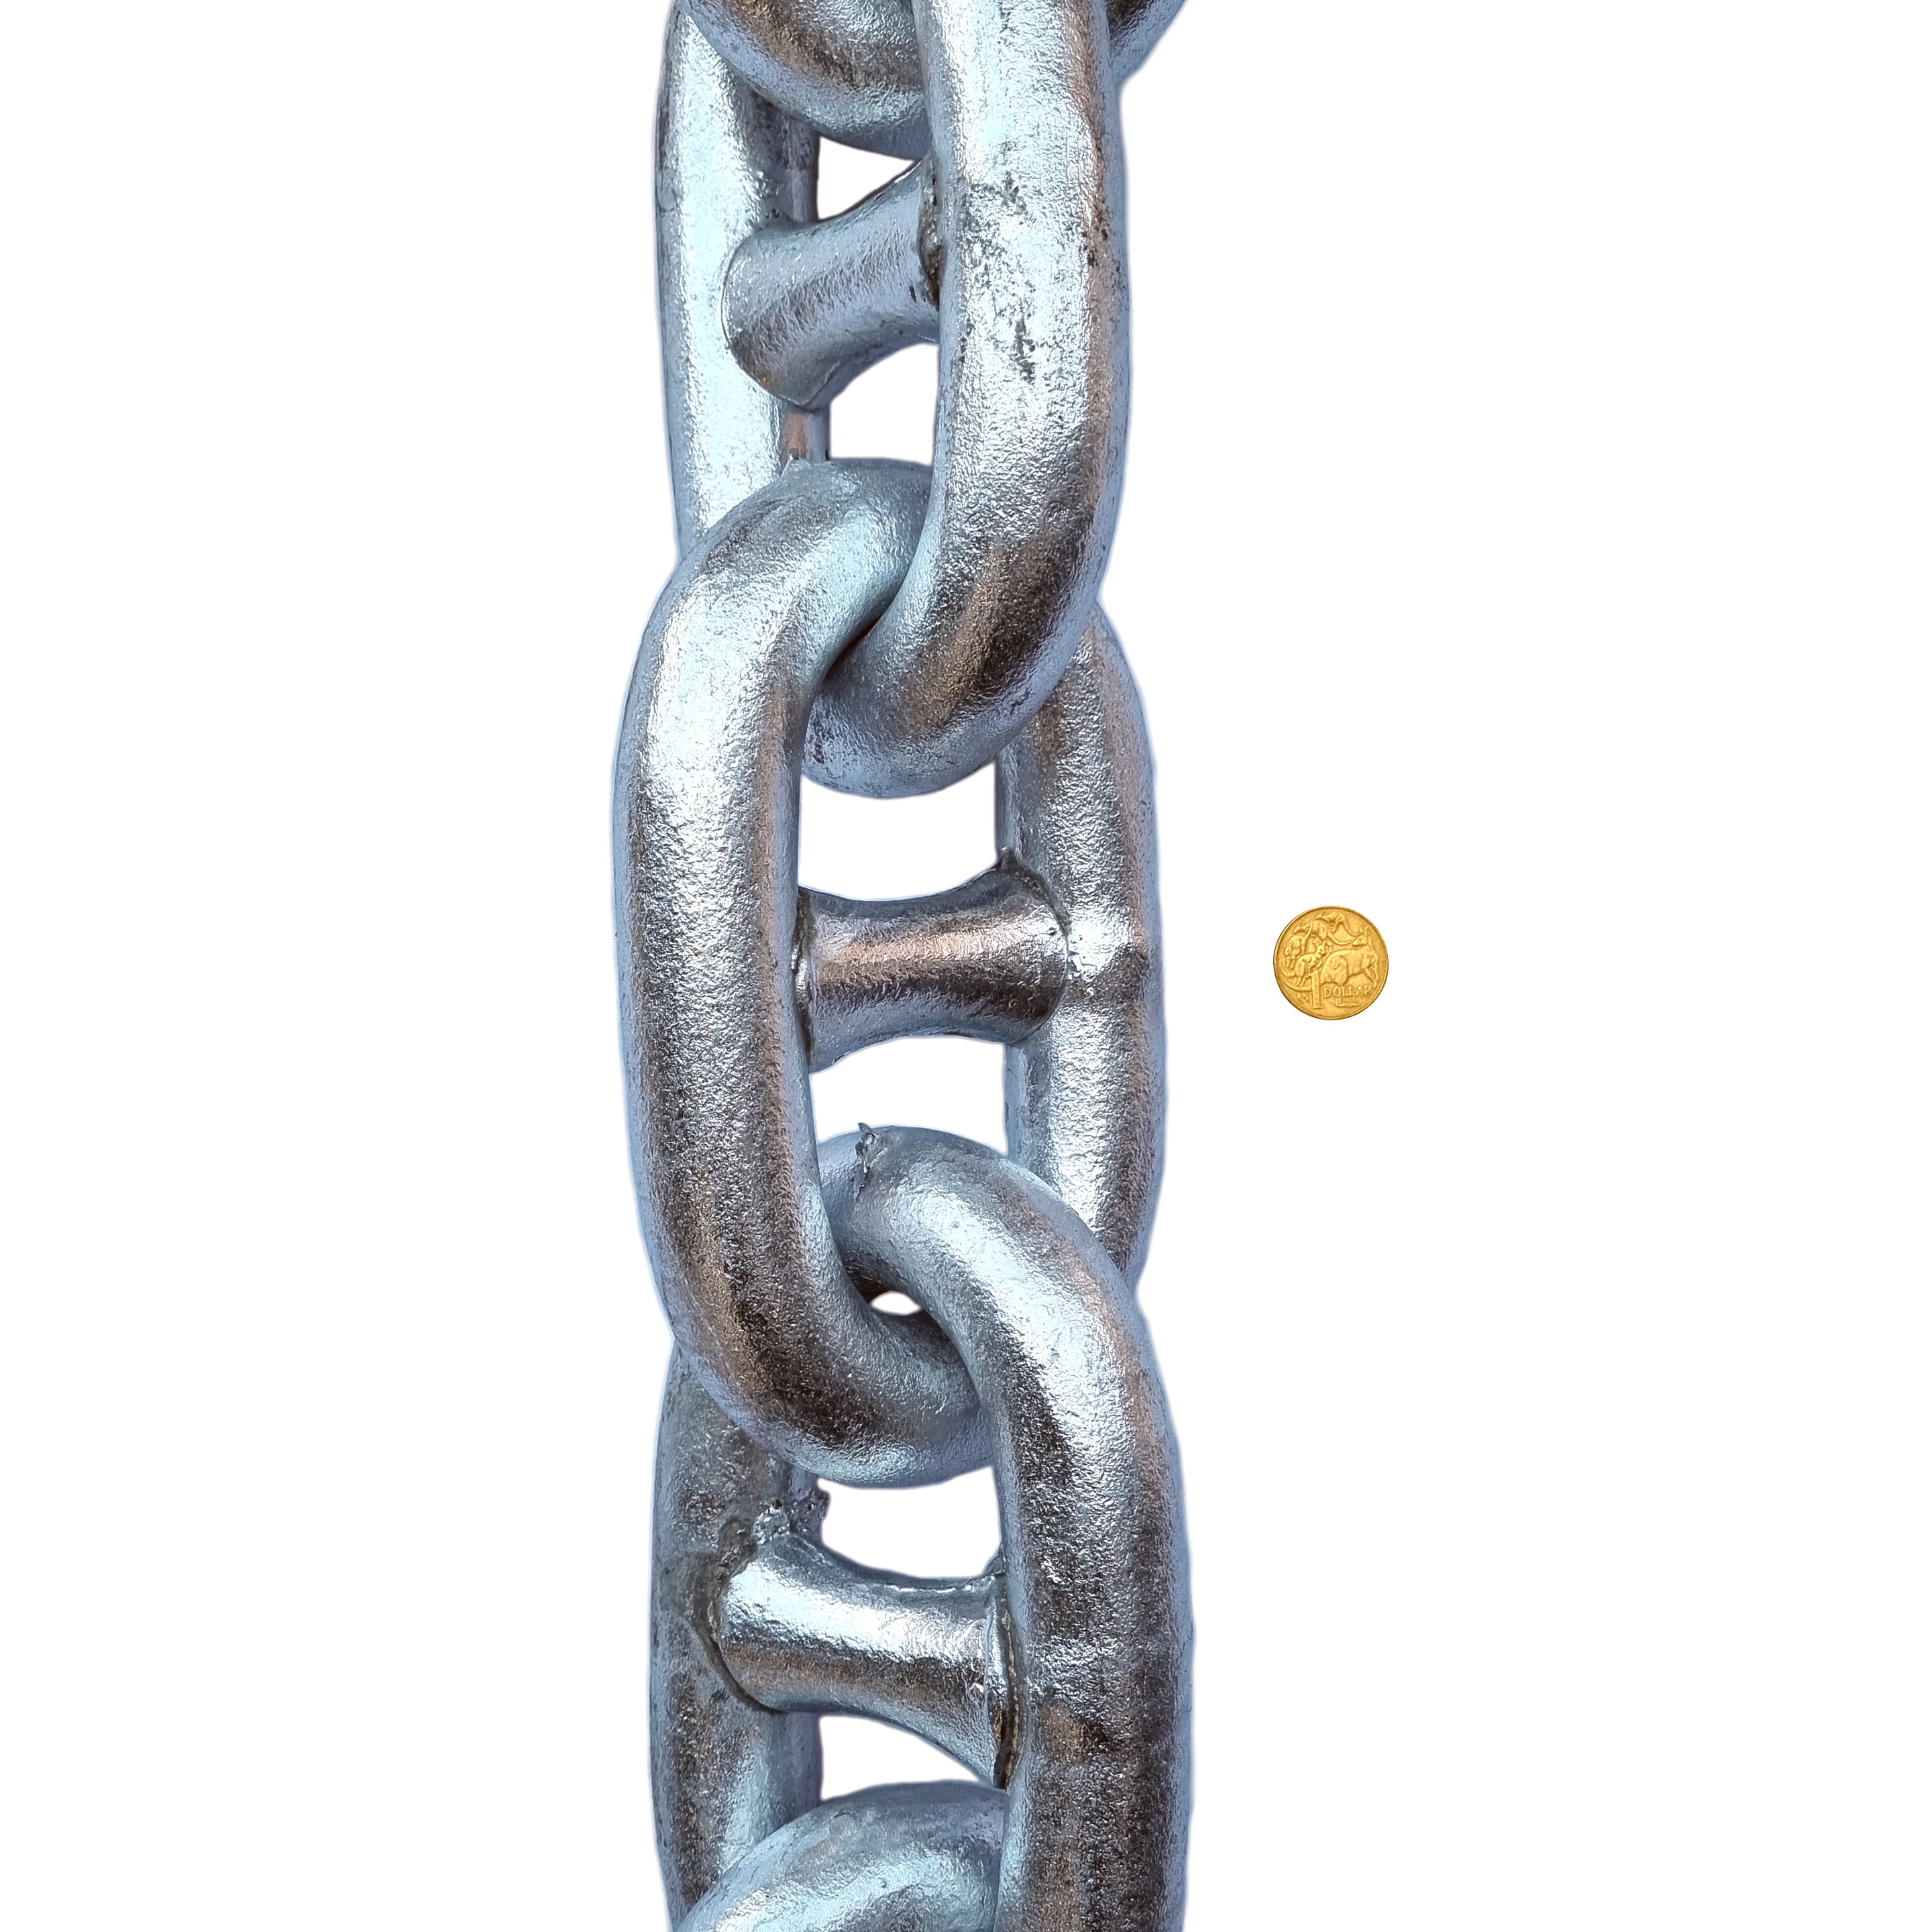 32mm Galvanised Stud Link Chain. Extra large chain. Australia wide shipping and Melbourne pick-up.